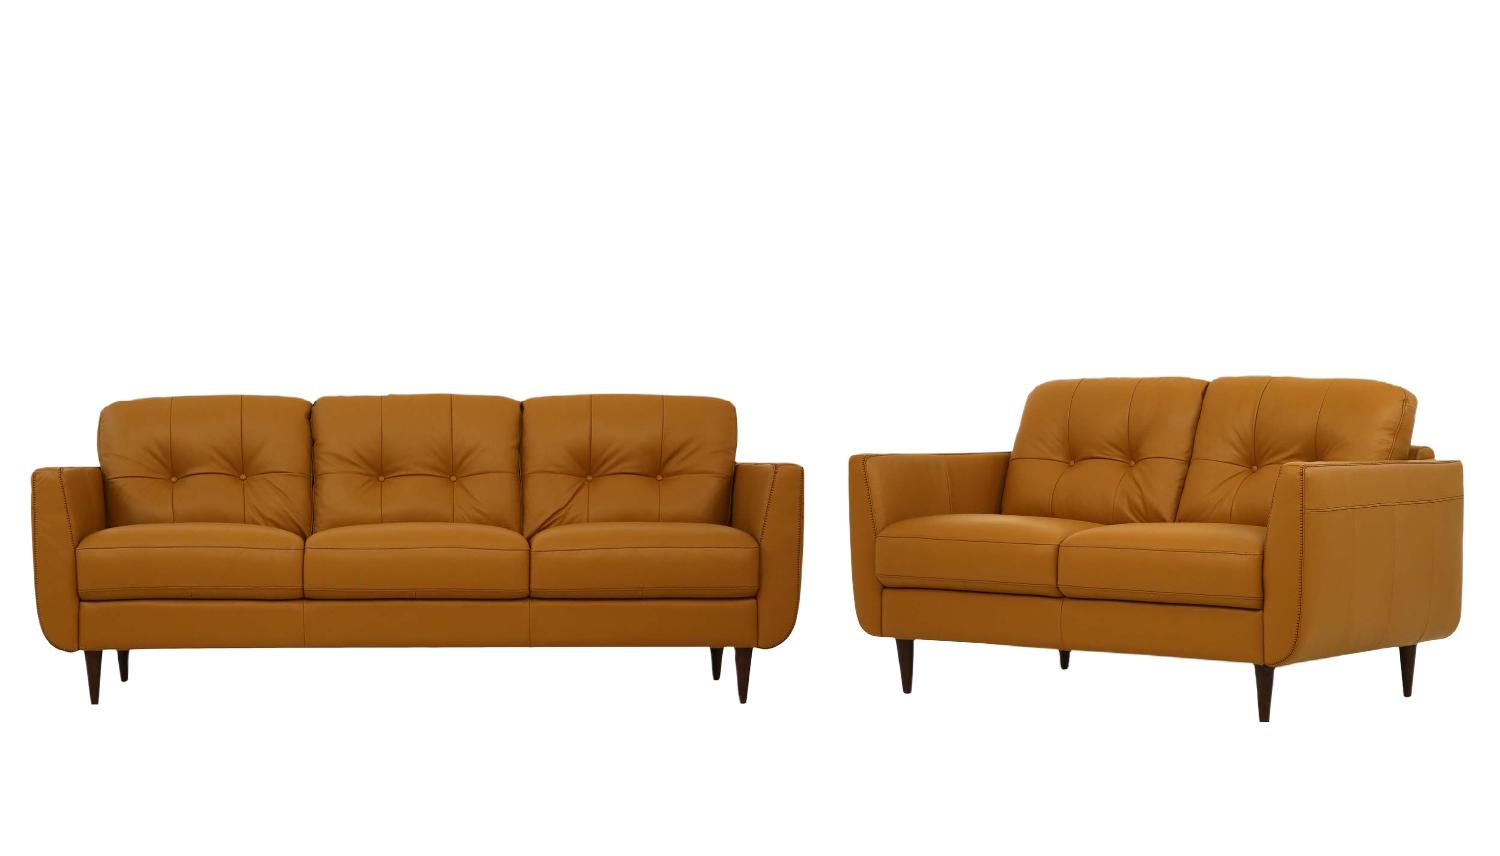 Transitional Sofa and Loveseat Set Radwan 54955-2pcs in Camel Leather